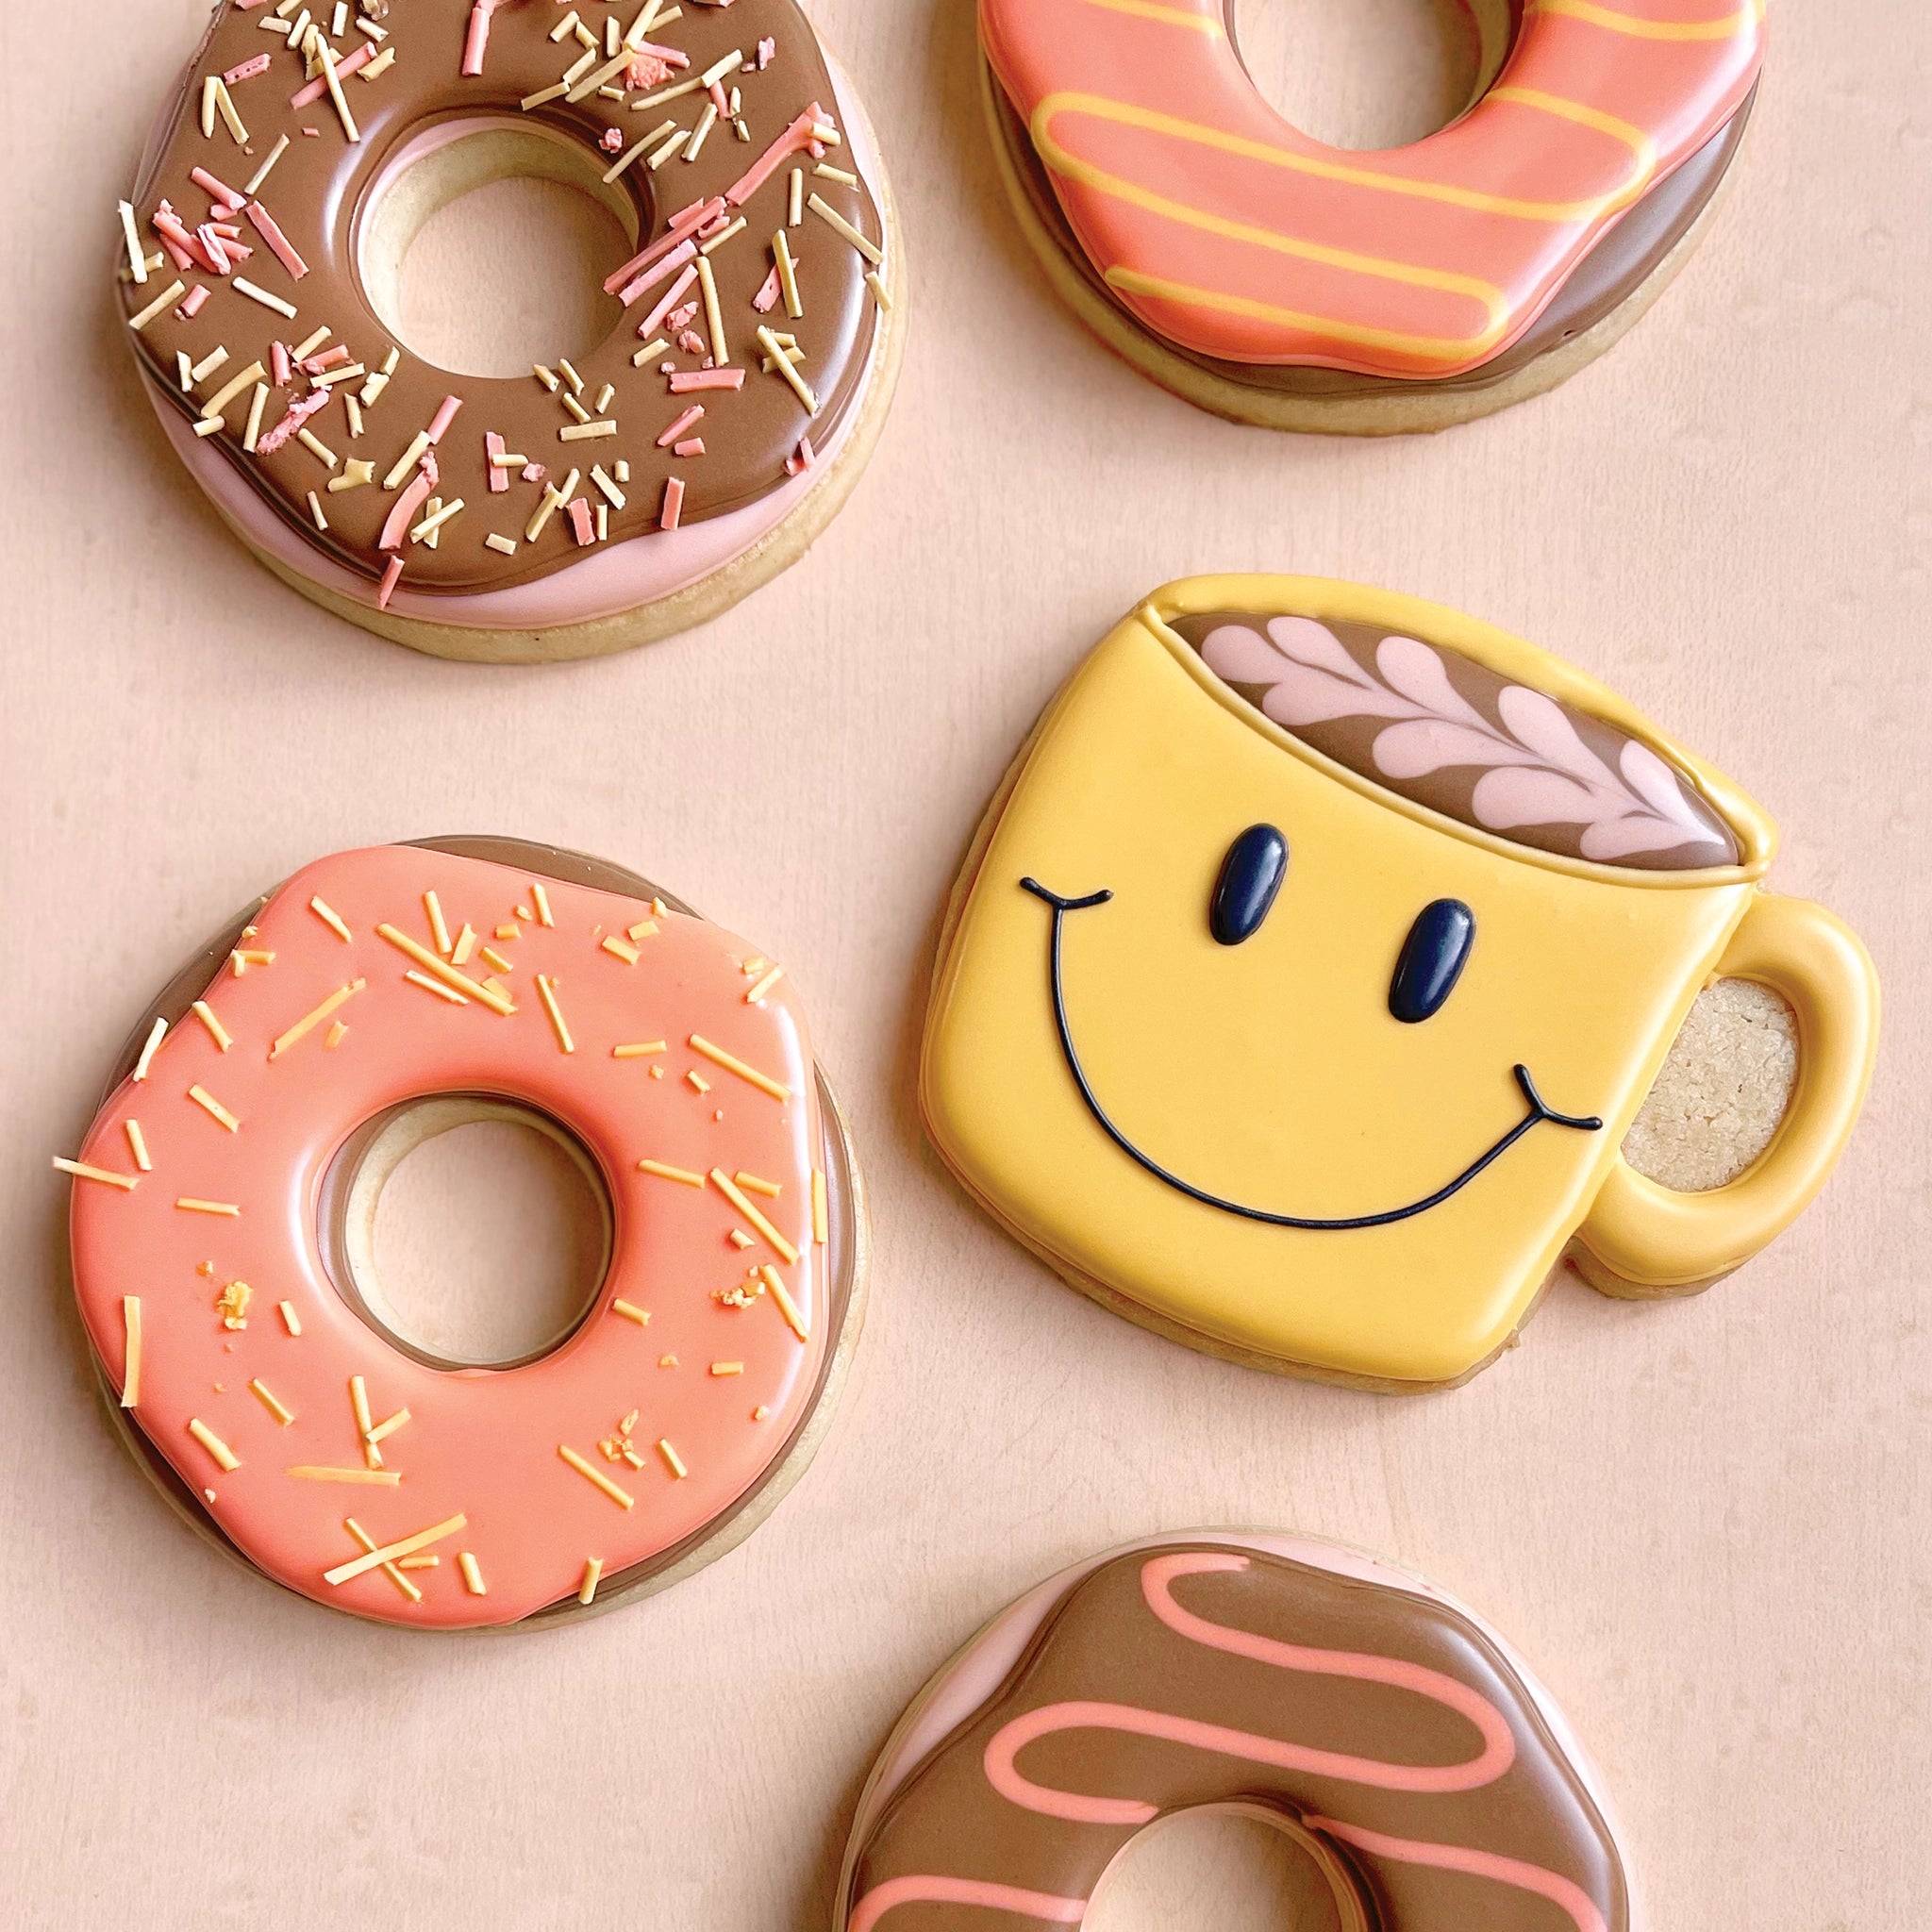 cookies decorated as donuts and coffee